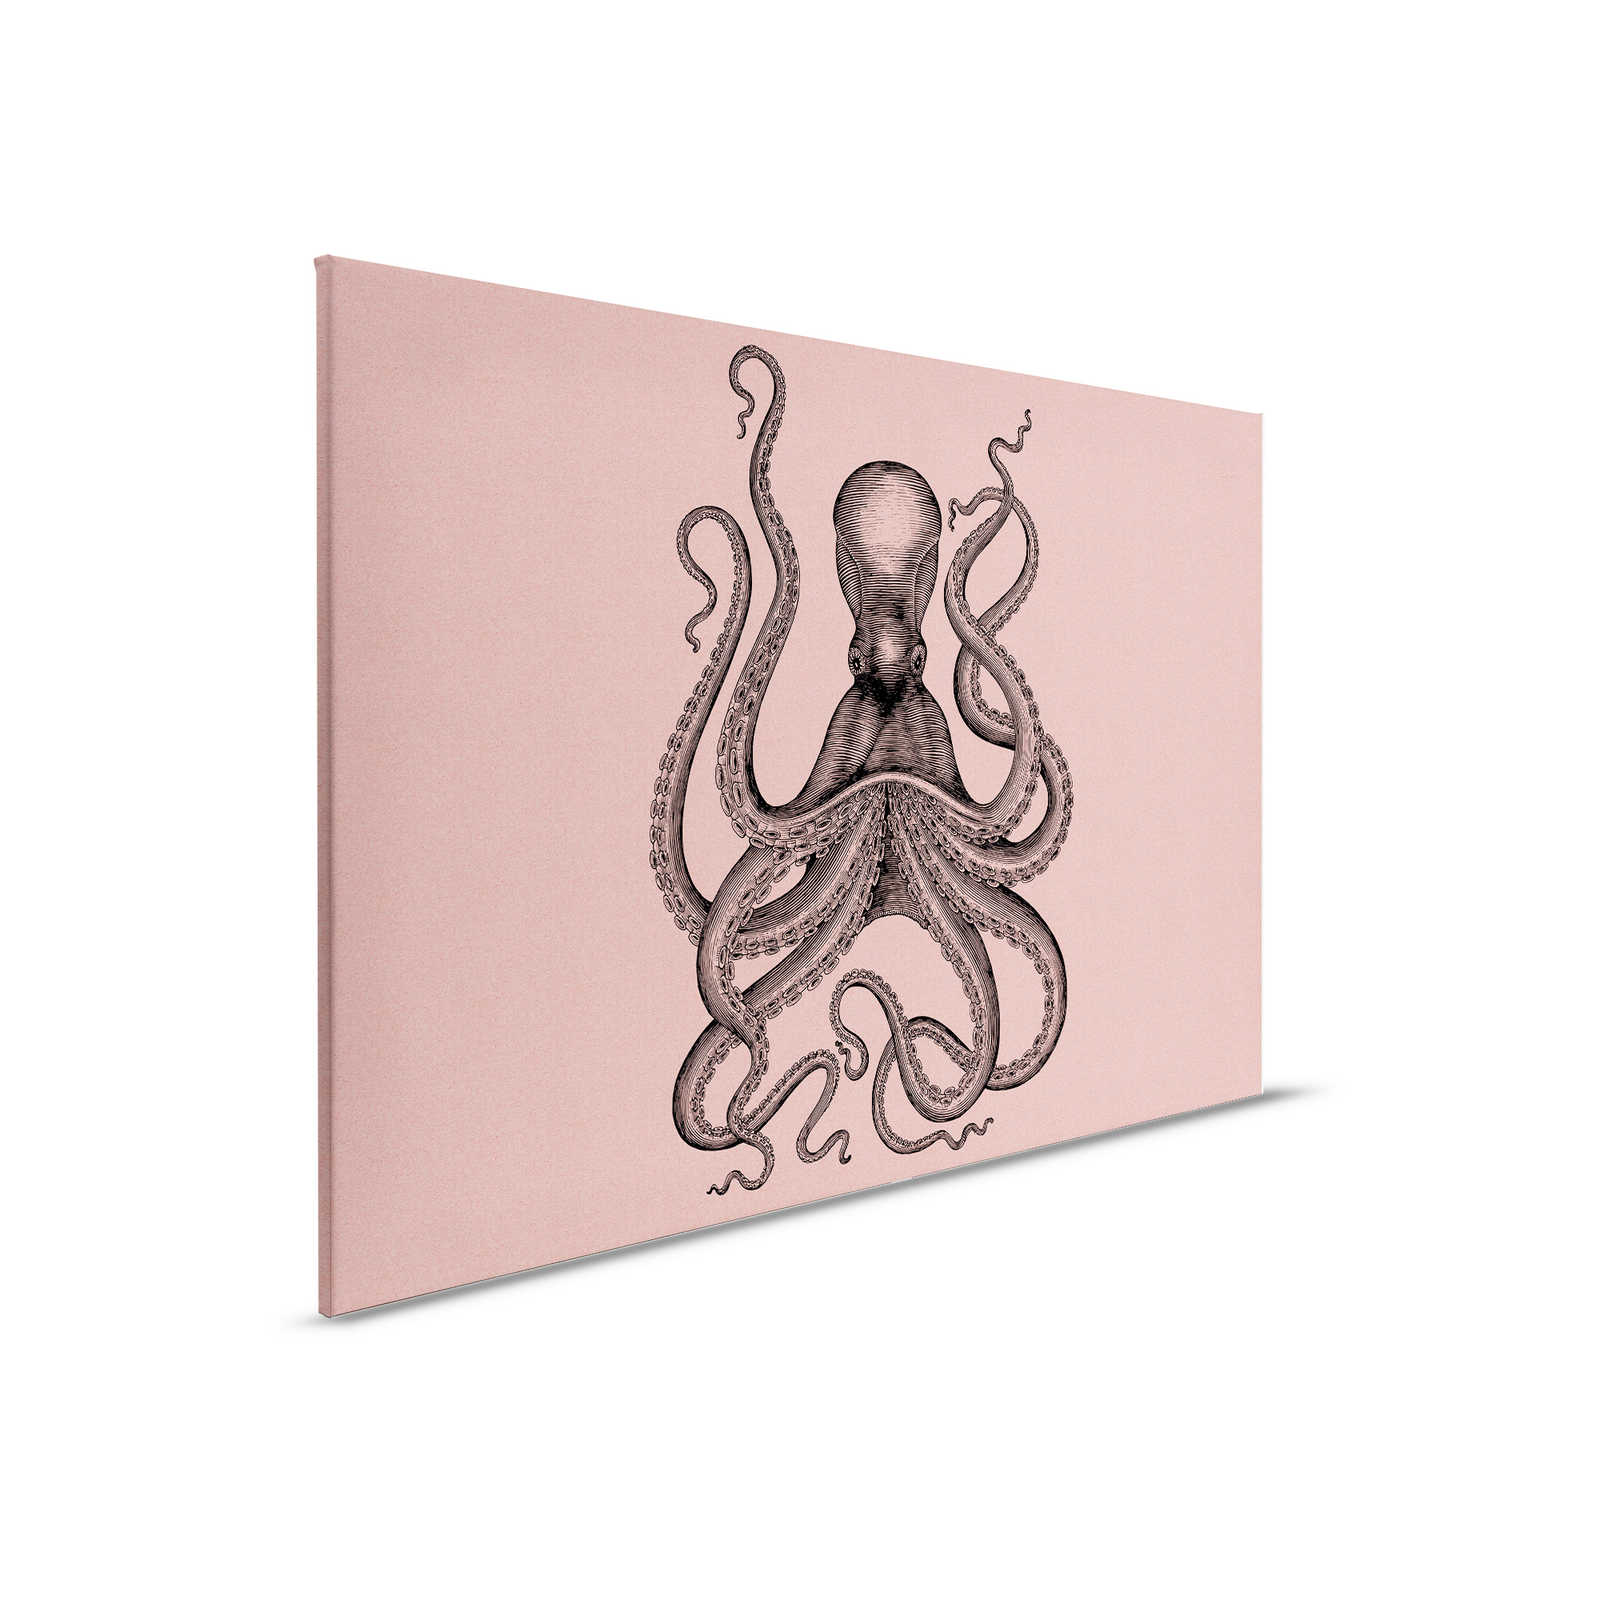         Jules 1 - Canvas painting with octopus in drawing & retro style in cardboard structure - 0.90 m x 0.60 m
    